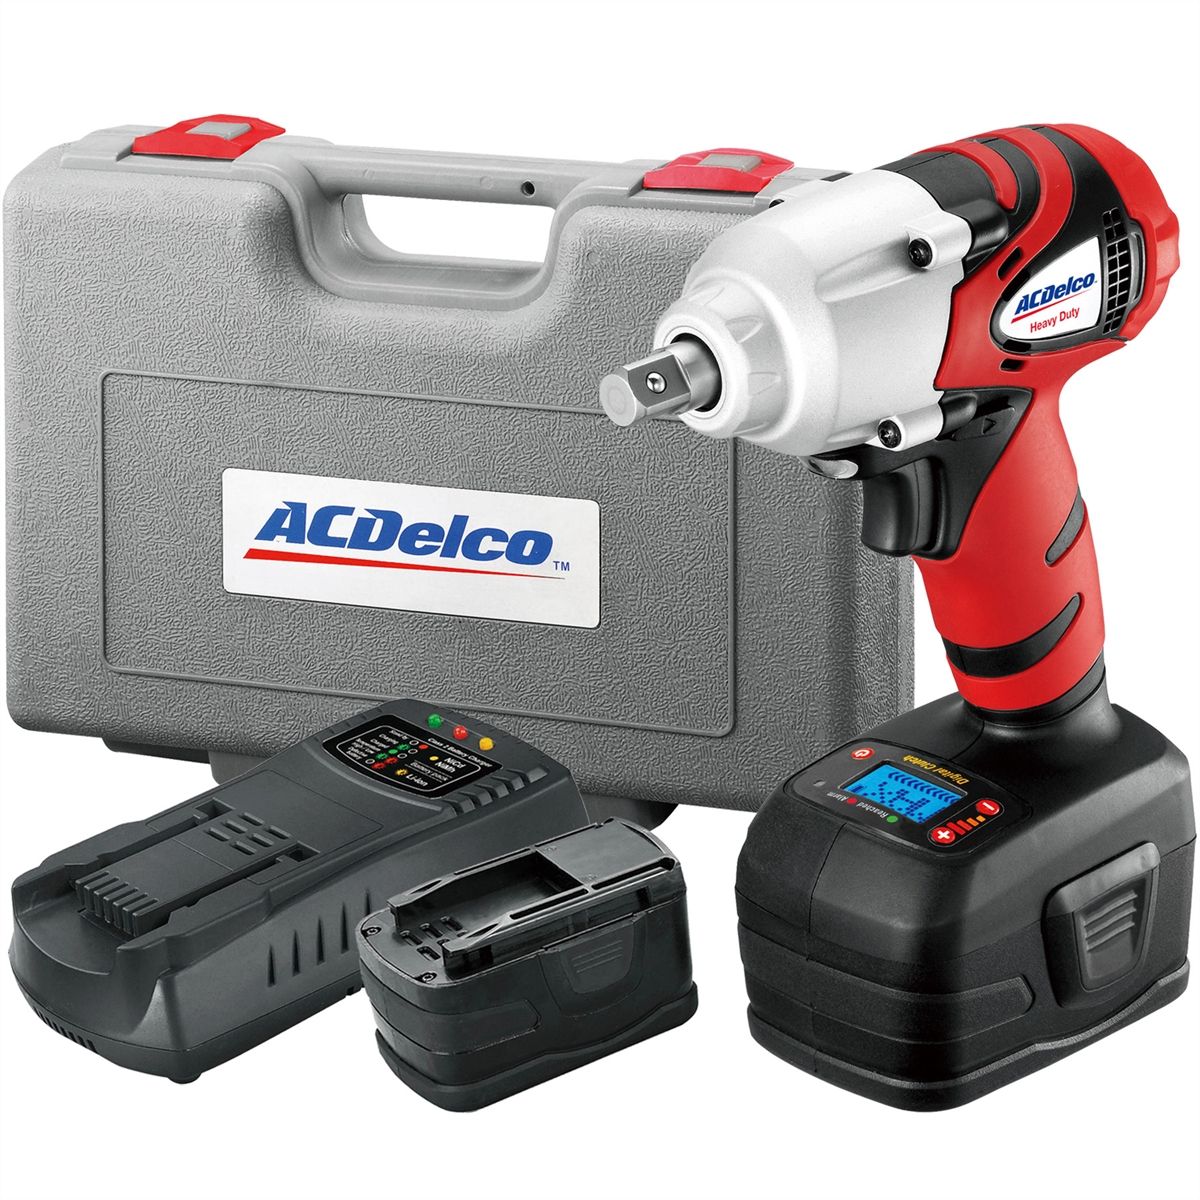 Twin Pack Drill+1//2Impact Wrench 2Ah ACDelco ARK2096I 18V